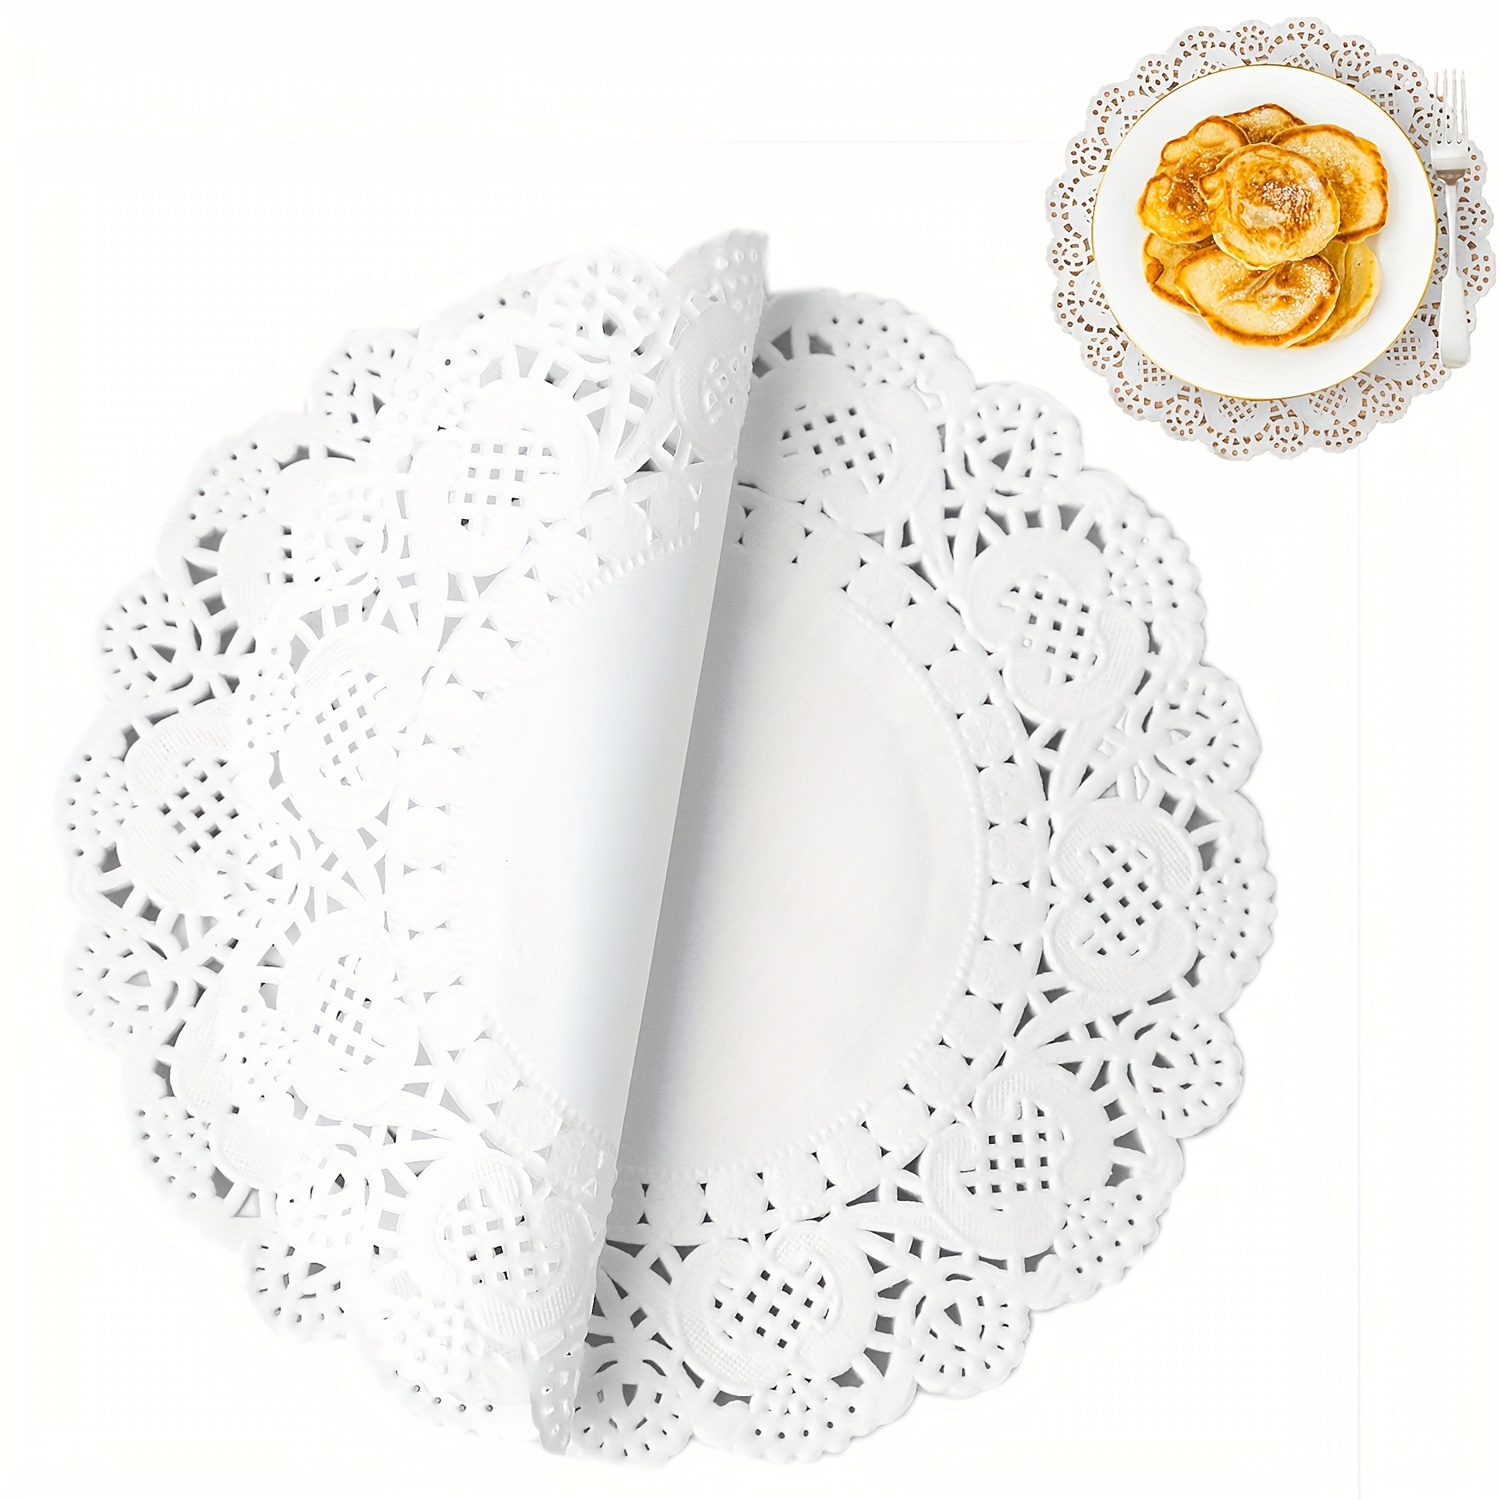 DECORA 9X6.5 Inch Rectangle White Paper Doilies for Birthday Party